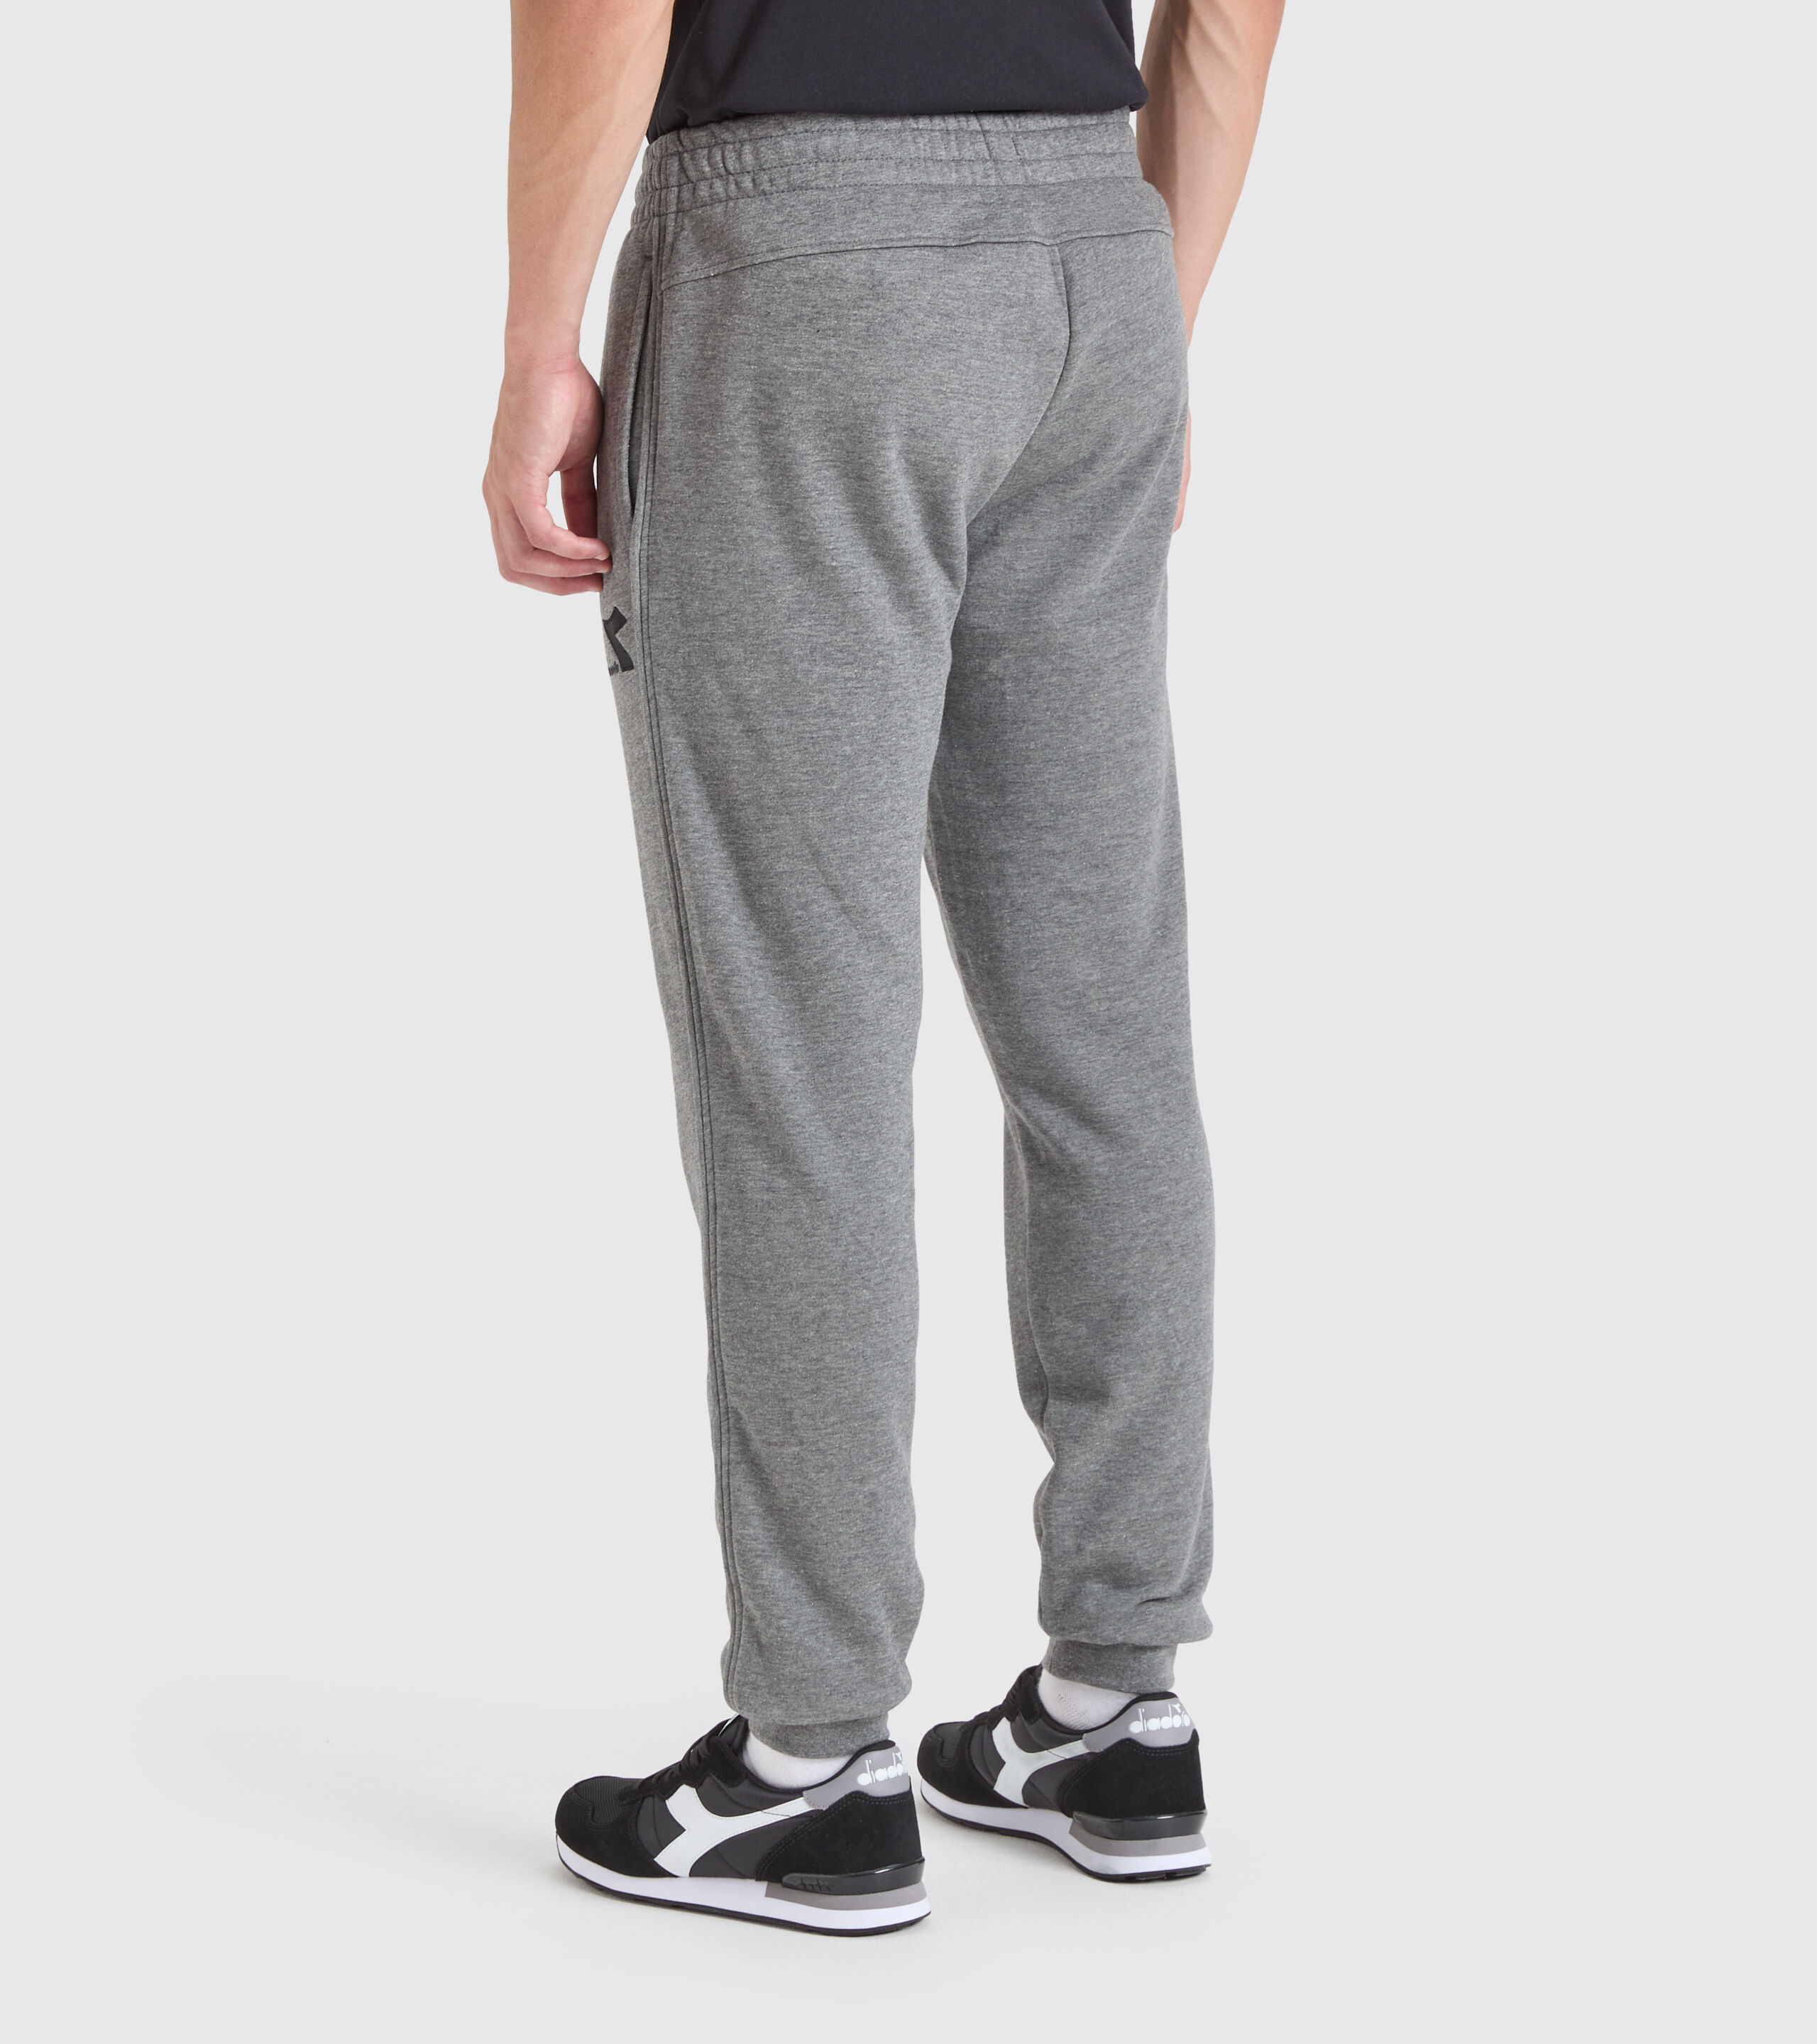 Mens Trousers  Buy Gym  Sports Trousers Online  IRONGEAR  IRONGEAR  Fitness